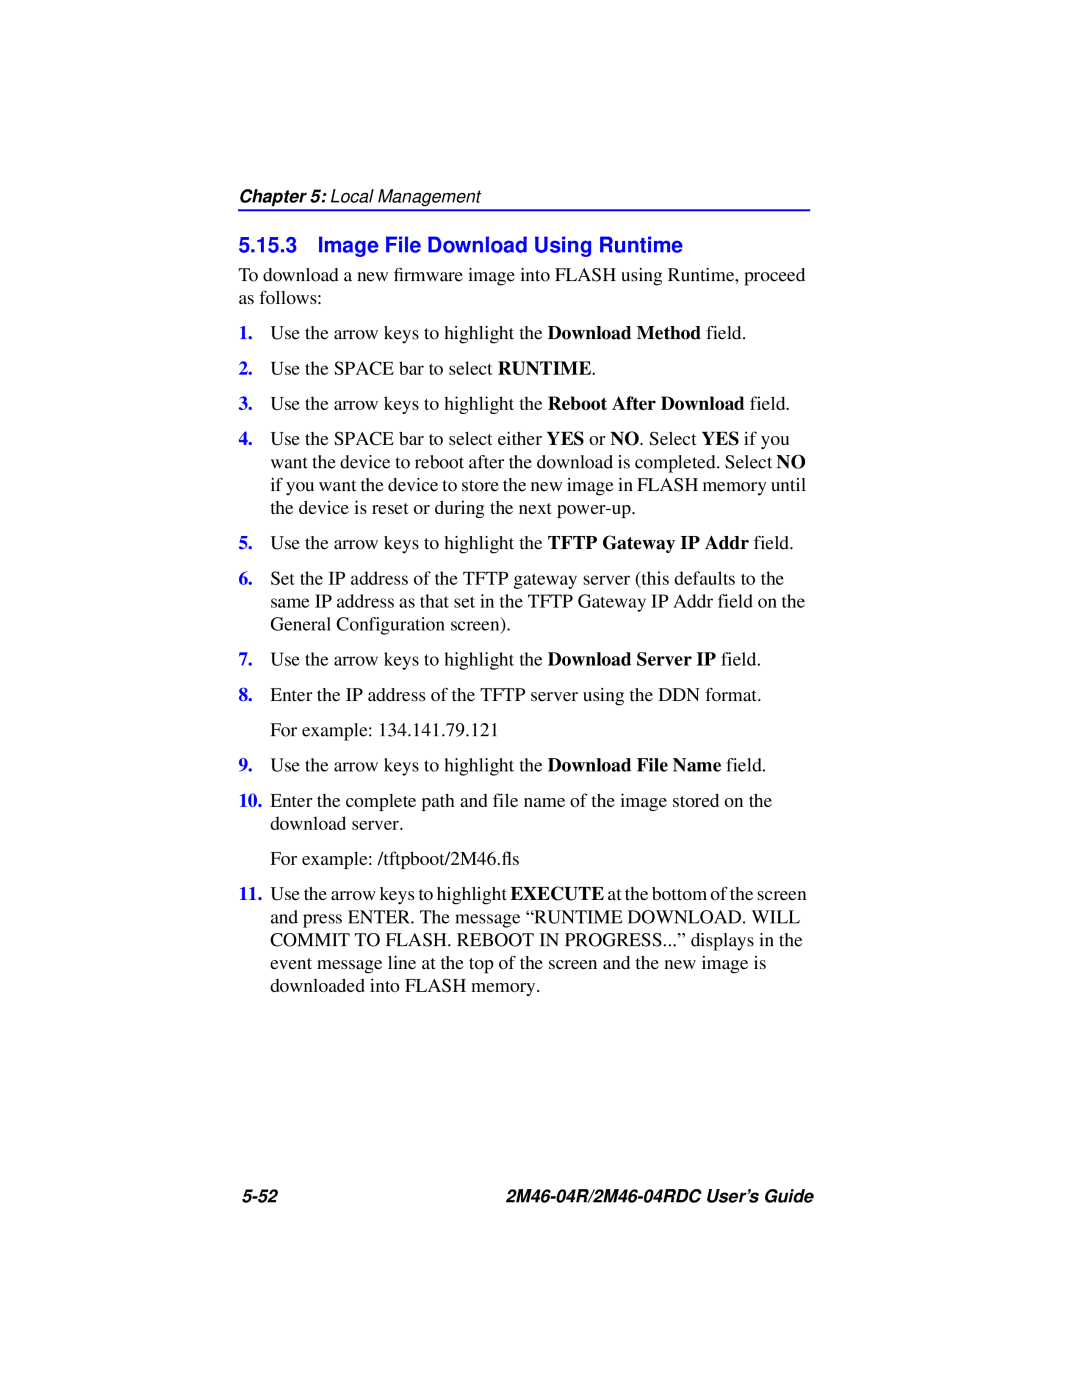 Cabletron Systems pmn manual Image File Download Using Runtime 